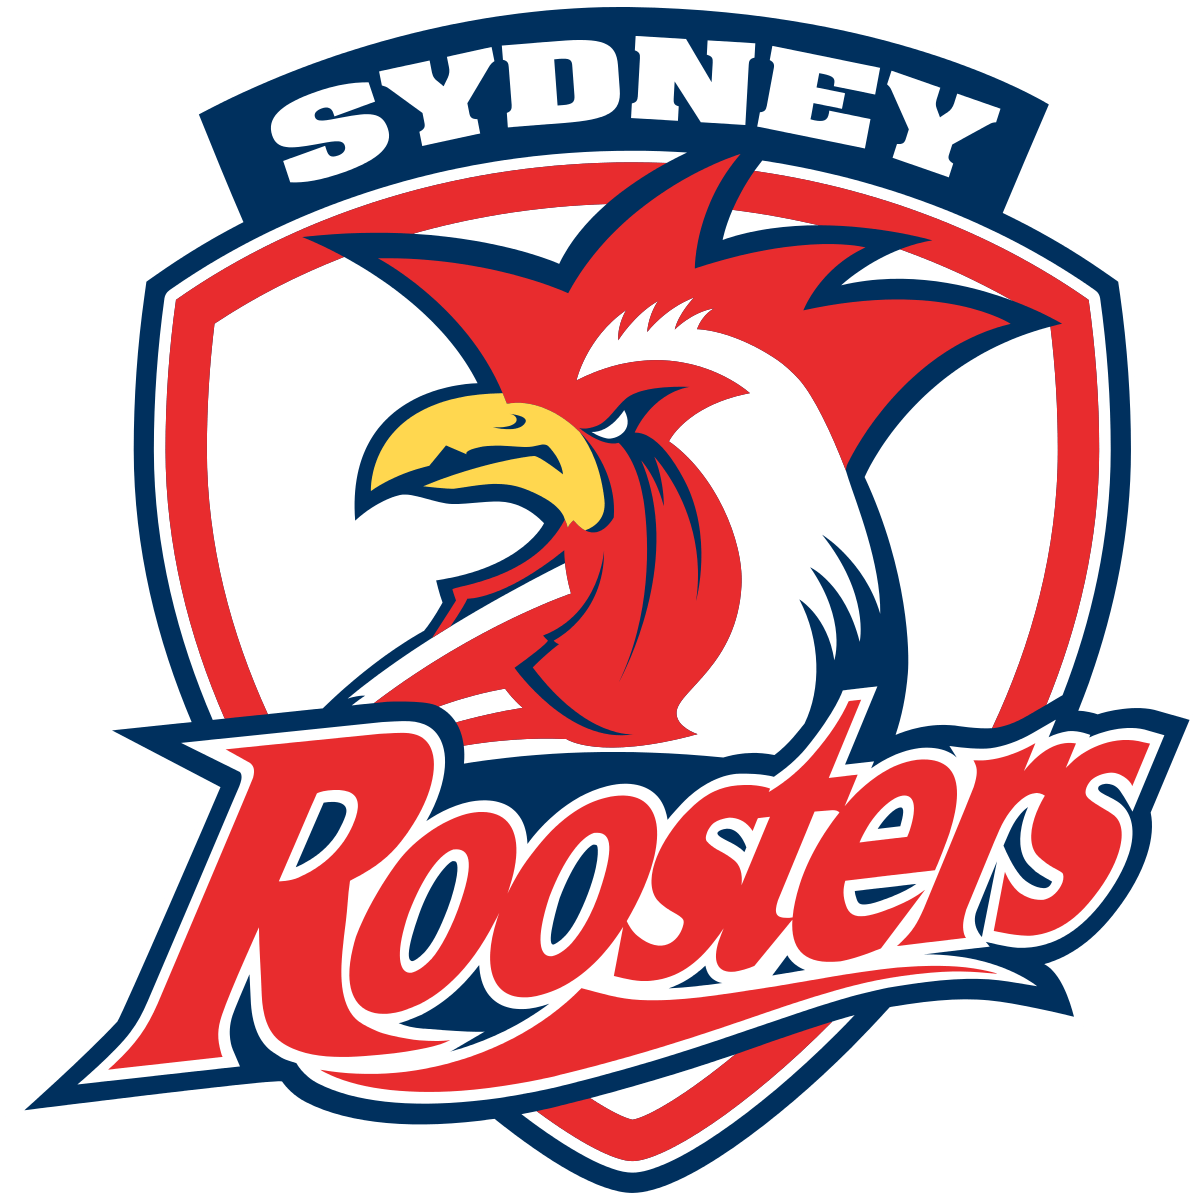 Famous Rooster Logo - Sydney Roosters